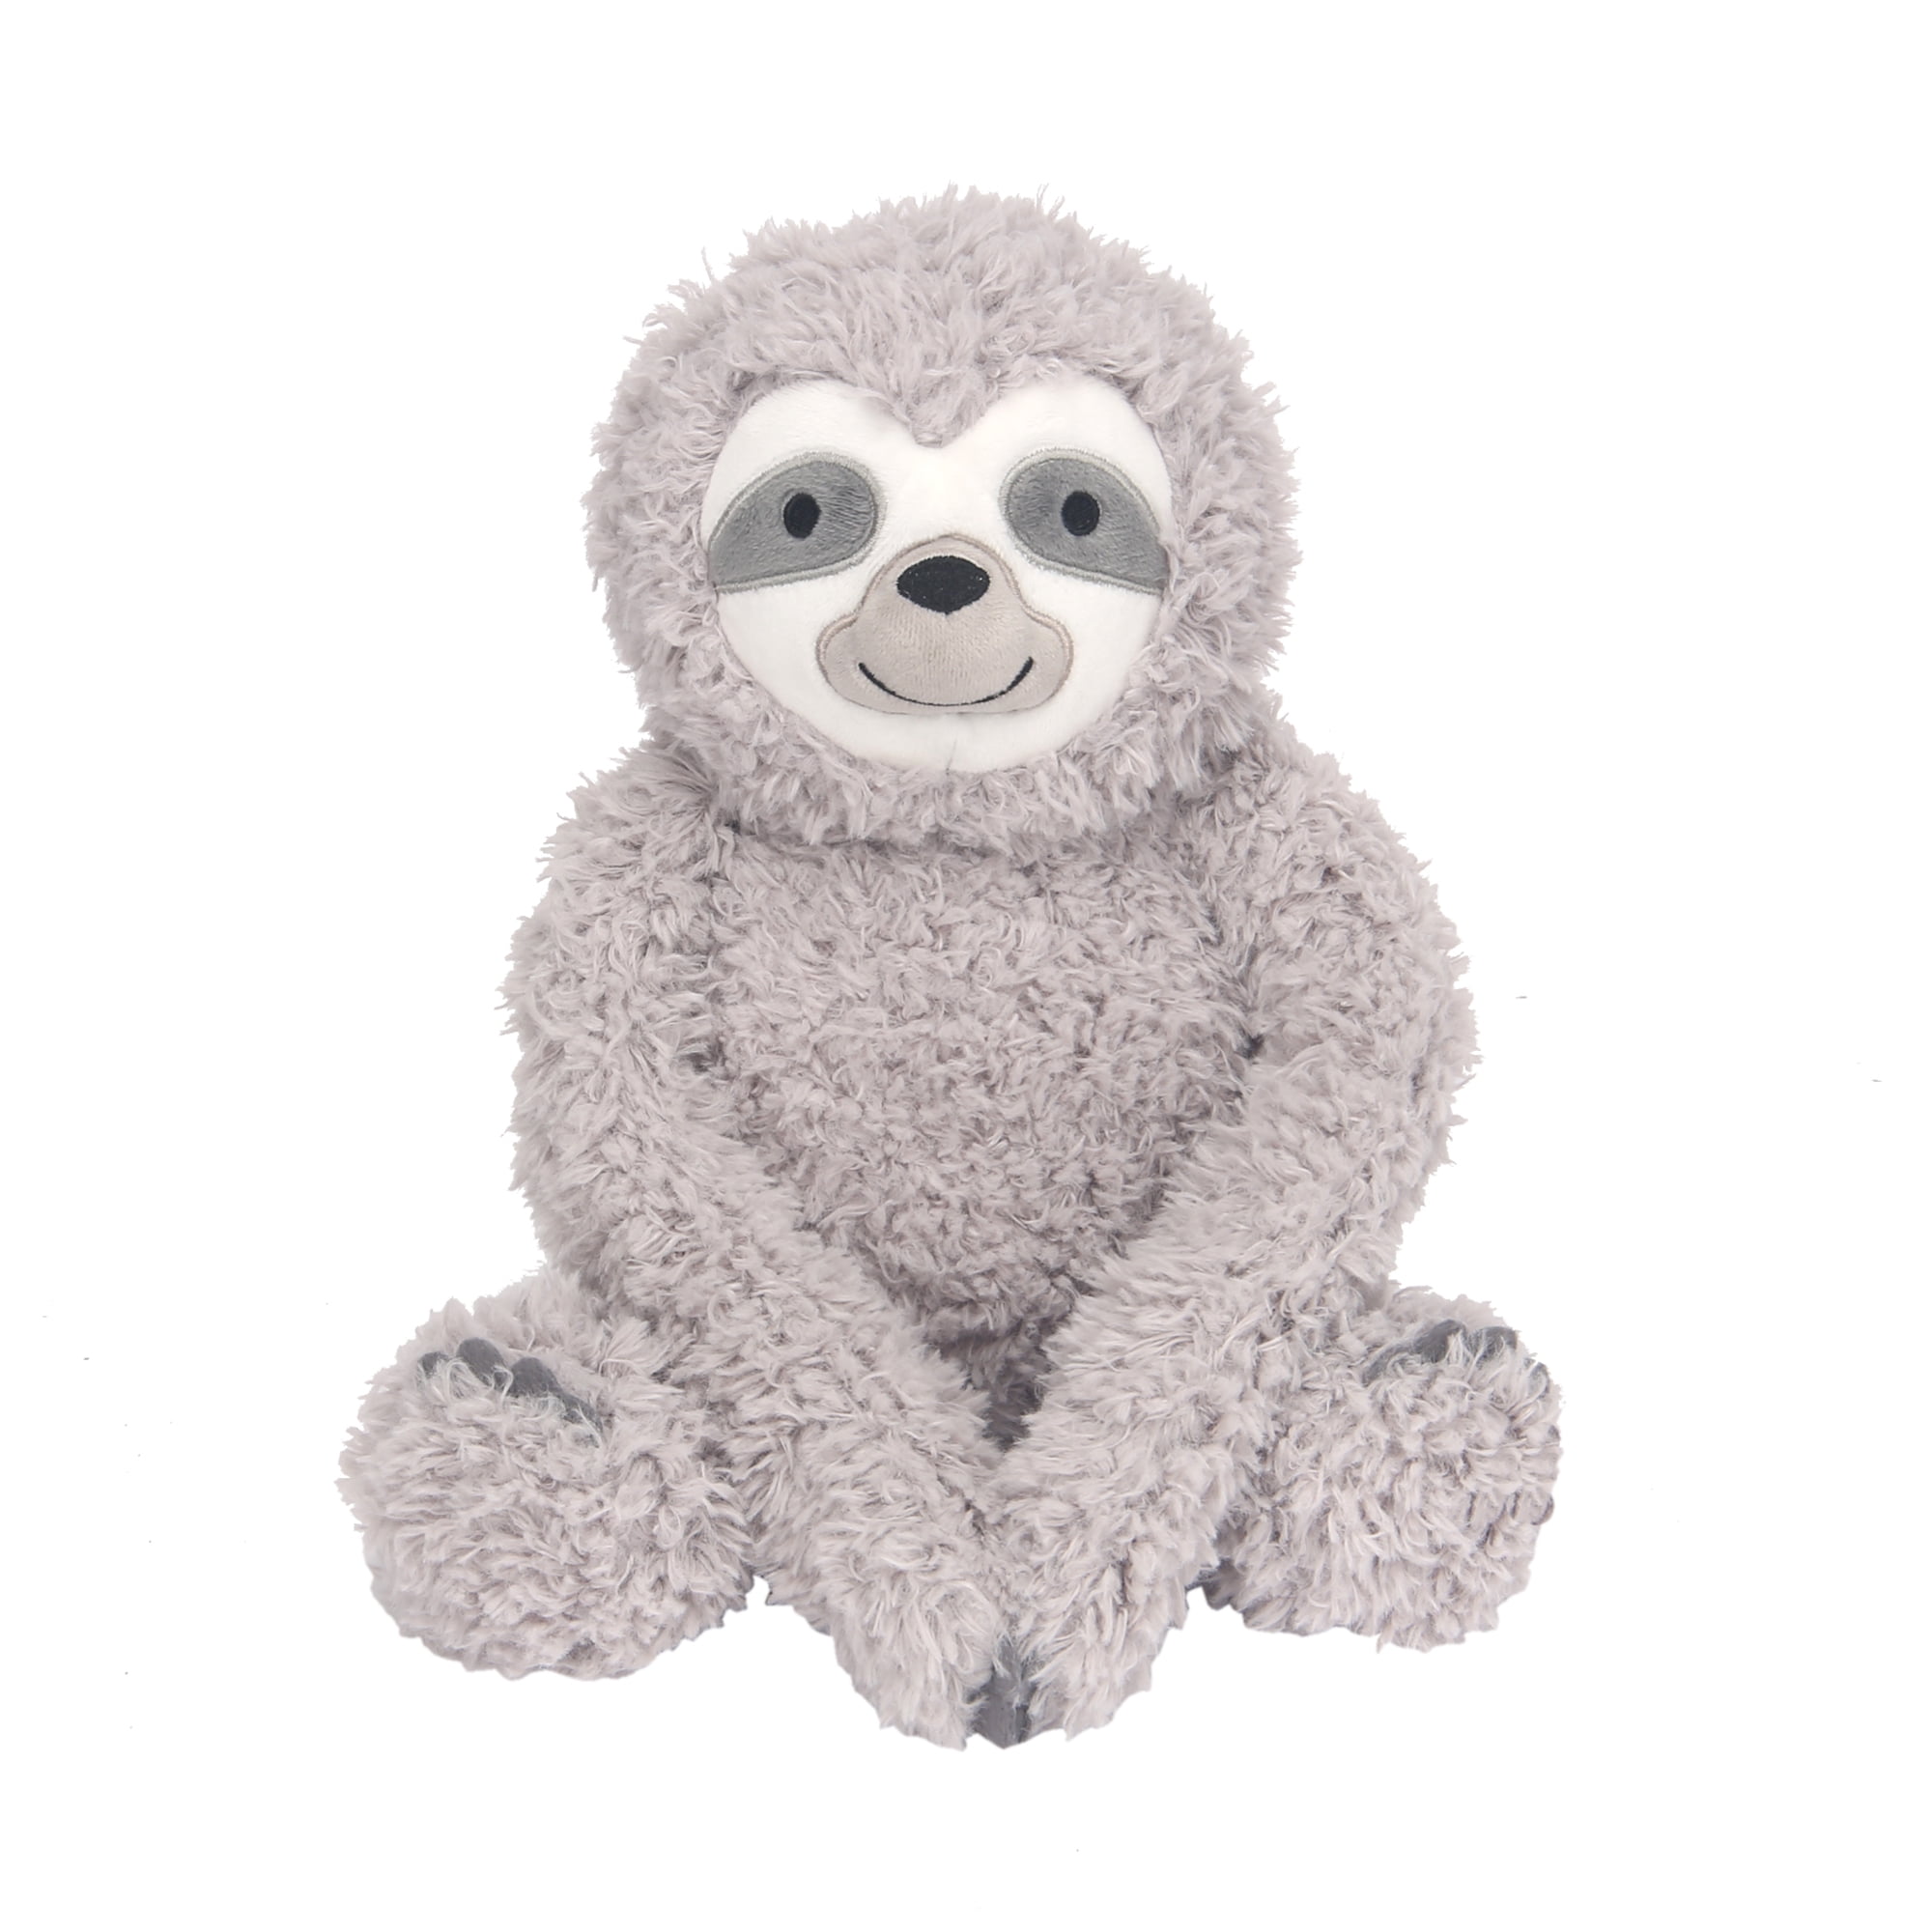 Hayes Adorable Toy Sloth Soft High Pile Material 12.5" Plush Animal Rainbow 